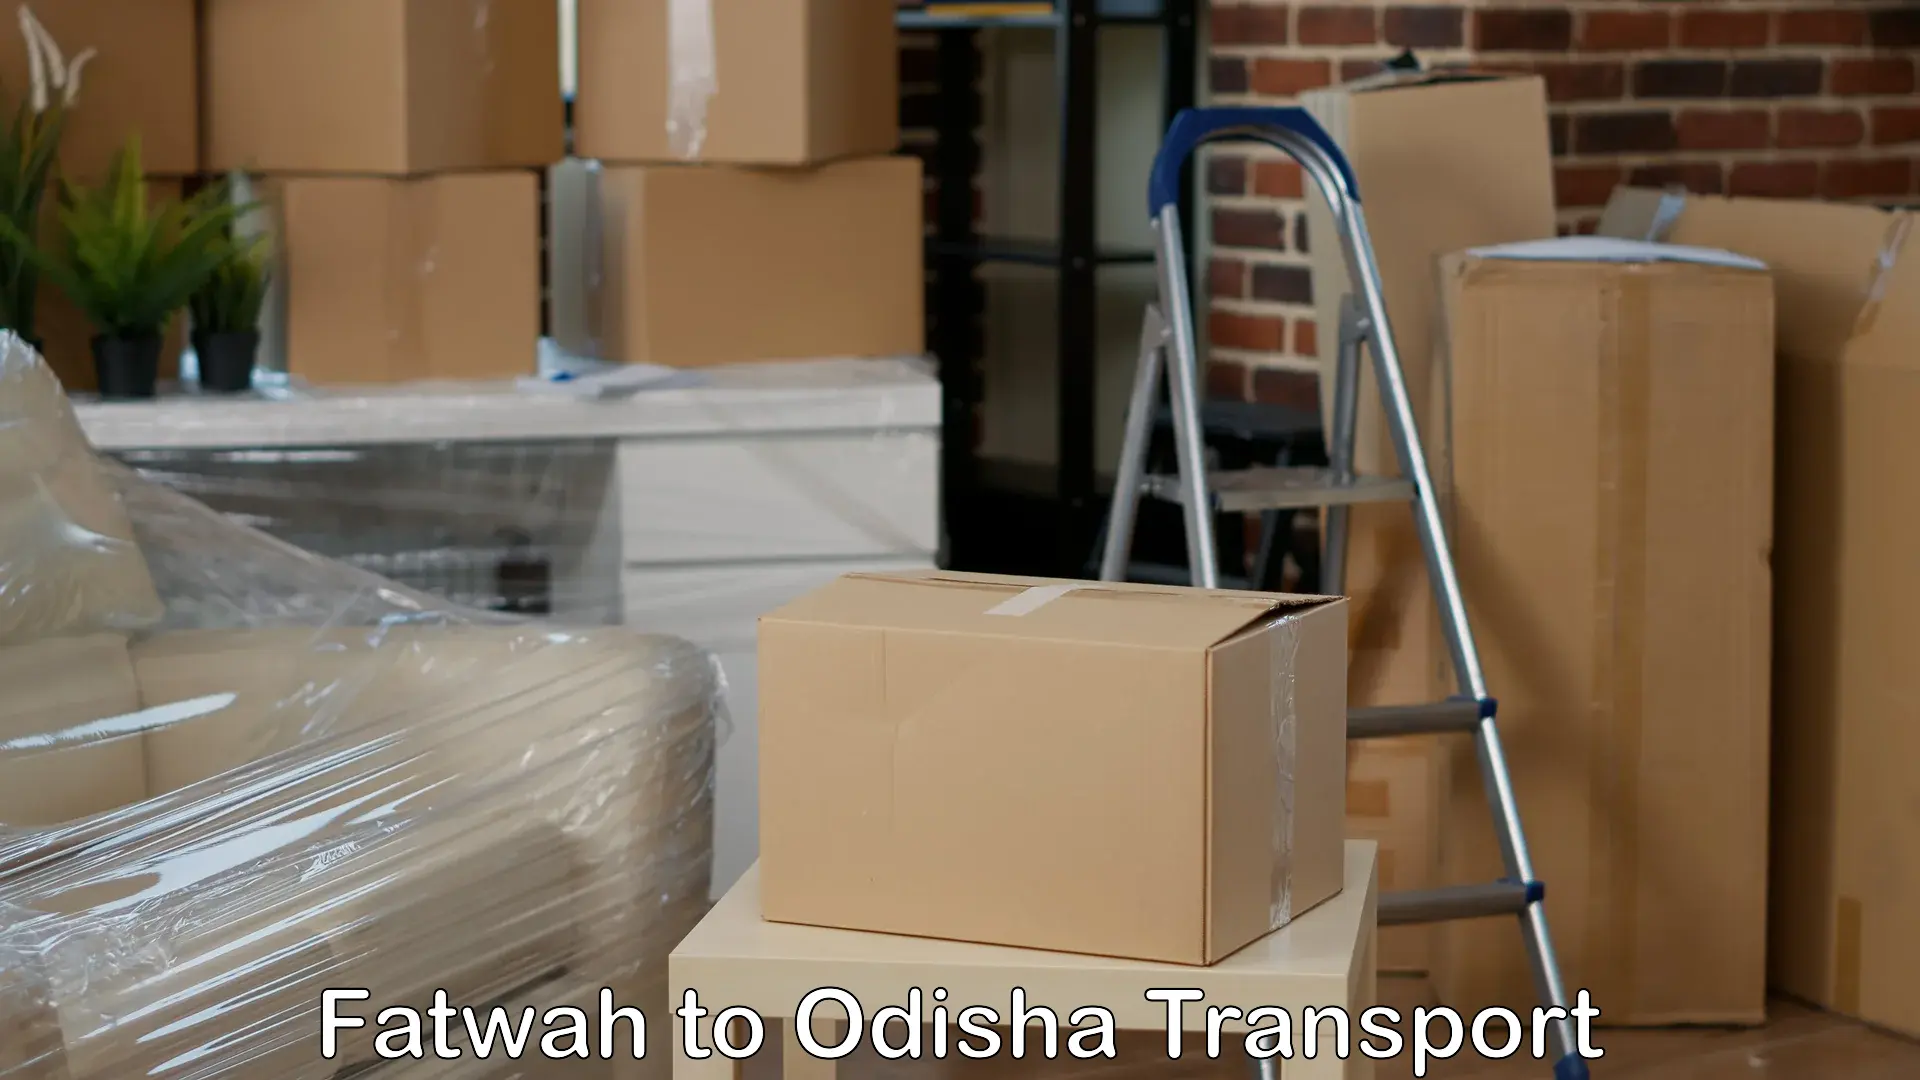 Truck transport companies in India Fatwah to Bheden